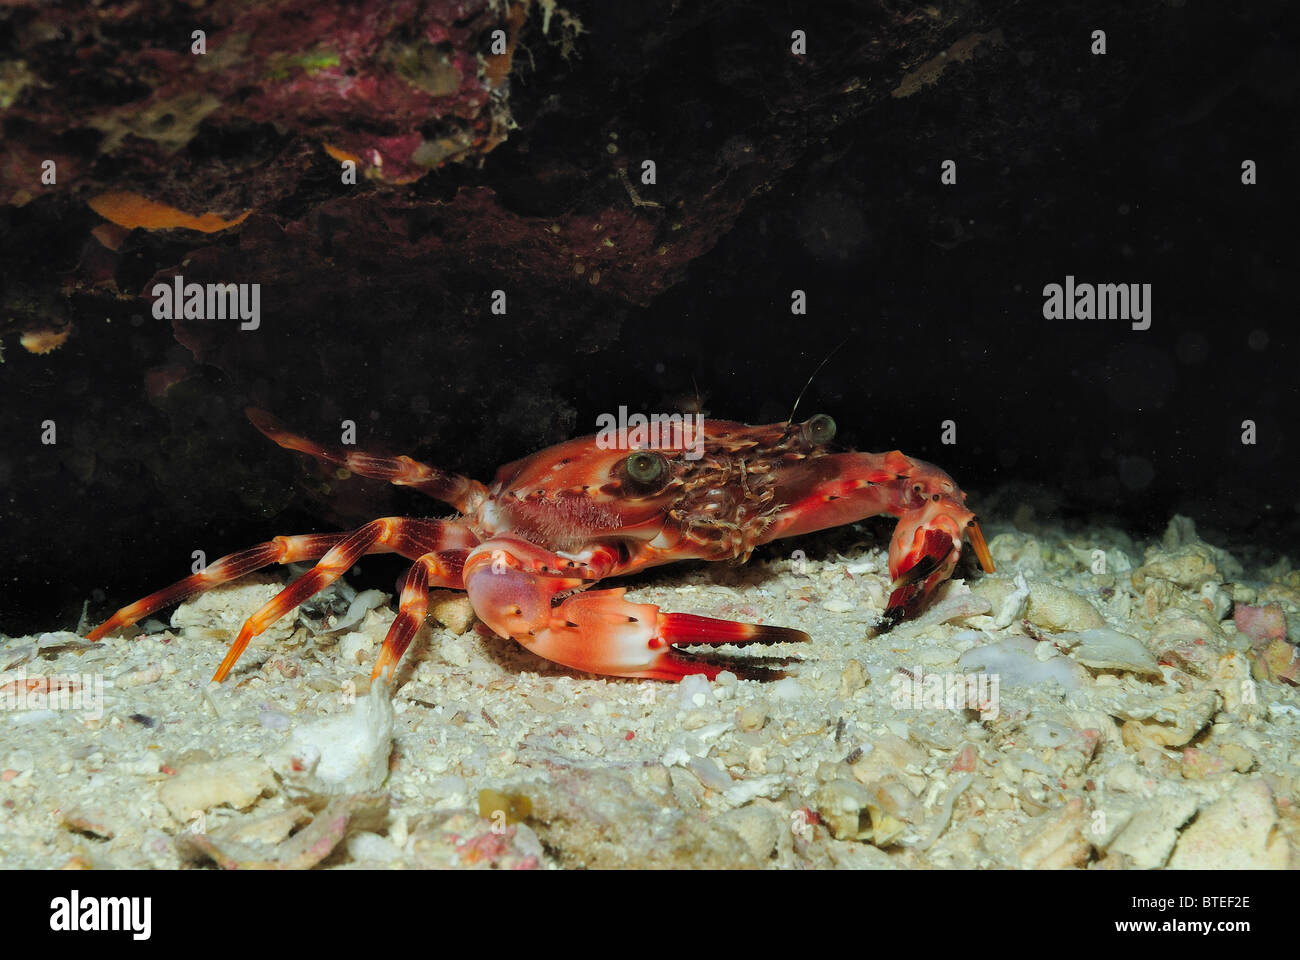 Swimmer crab in the Red Sea. Stock Photo